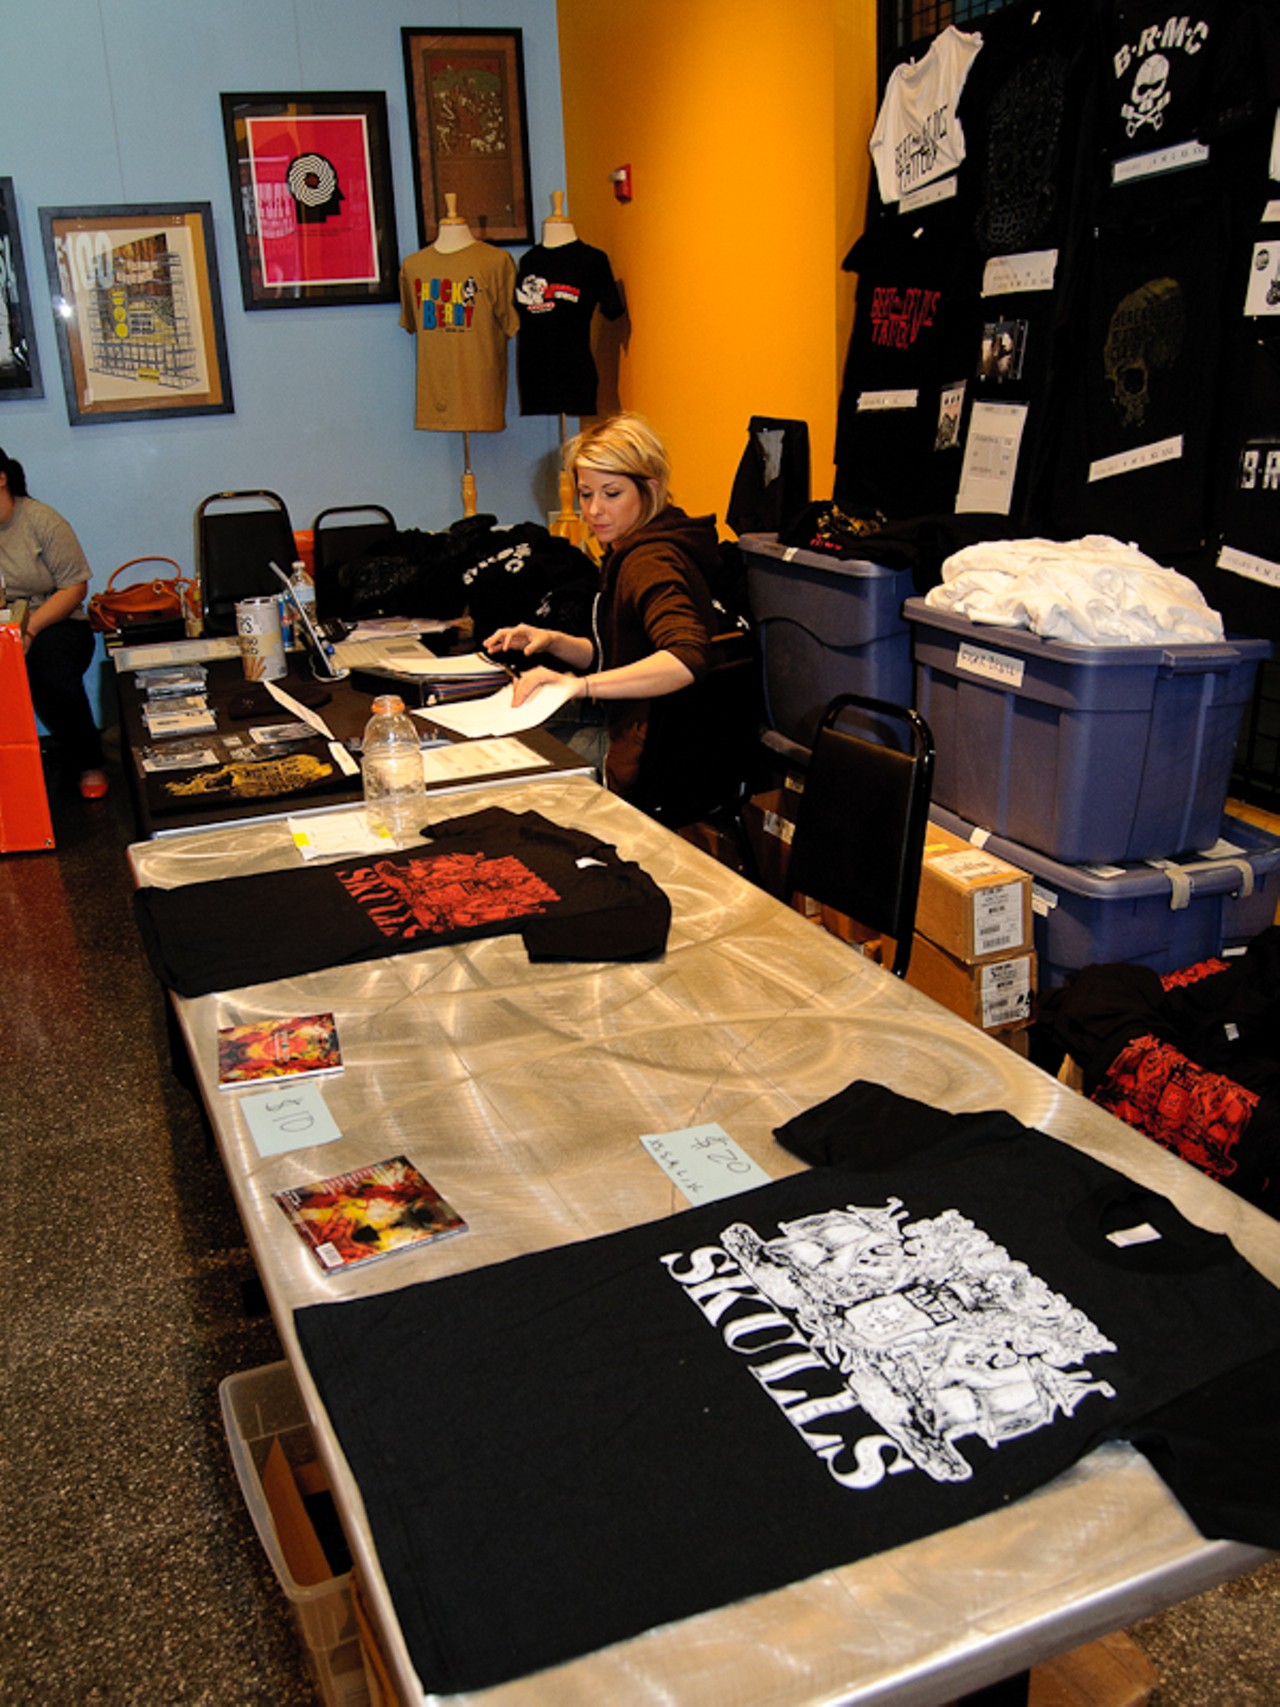 Both Black Rebel Motorcycle Club and Band of Skulls had merch for sale -- including a smorgasbord of killer tees.